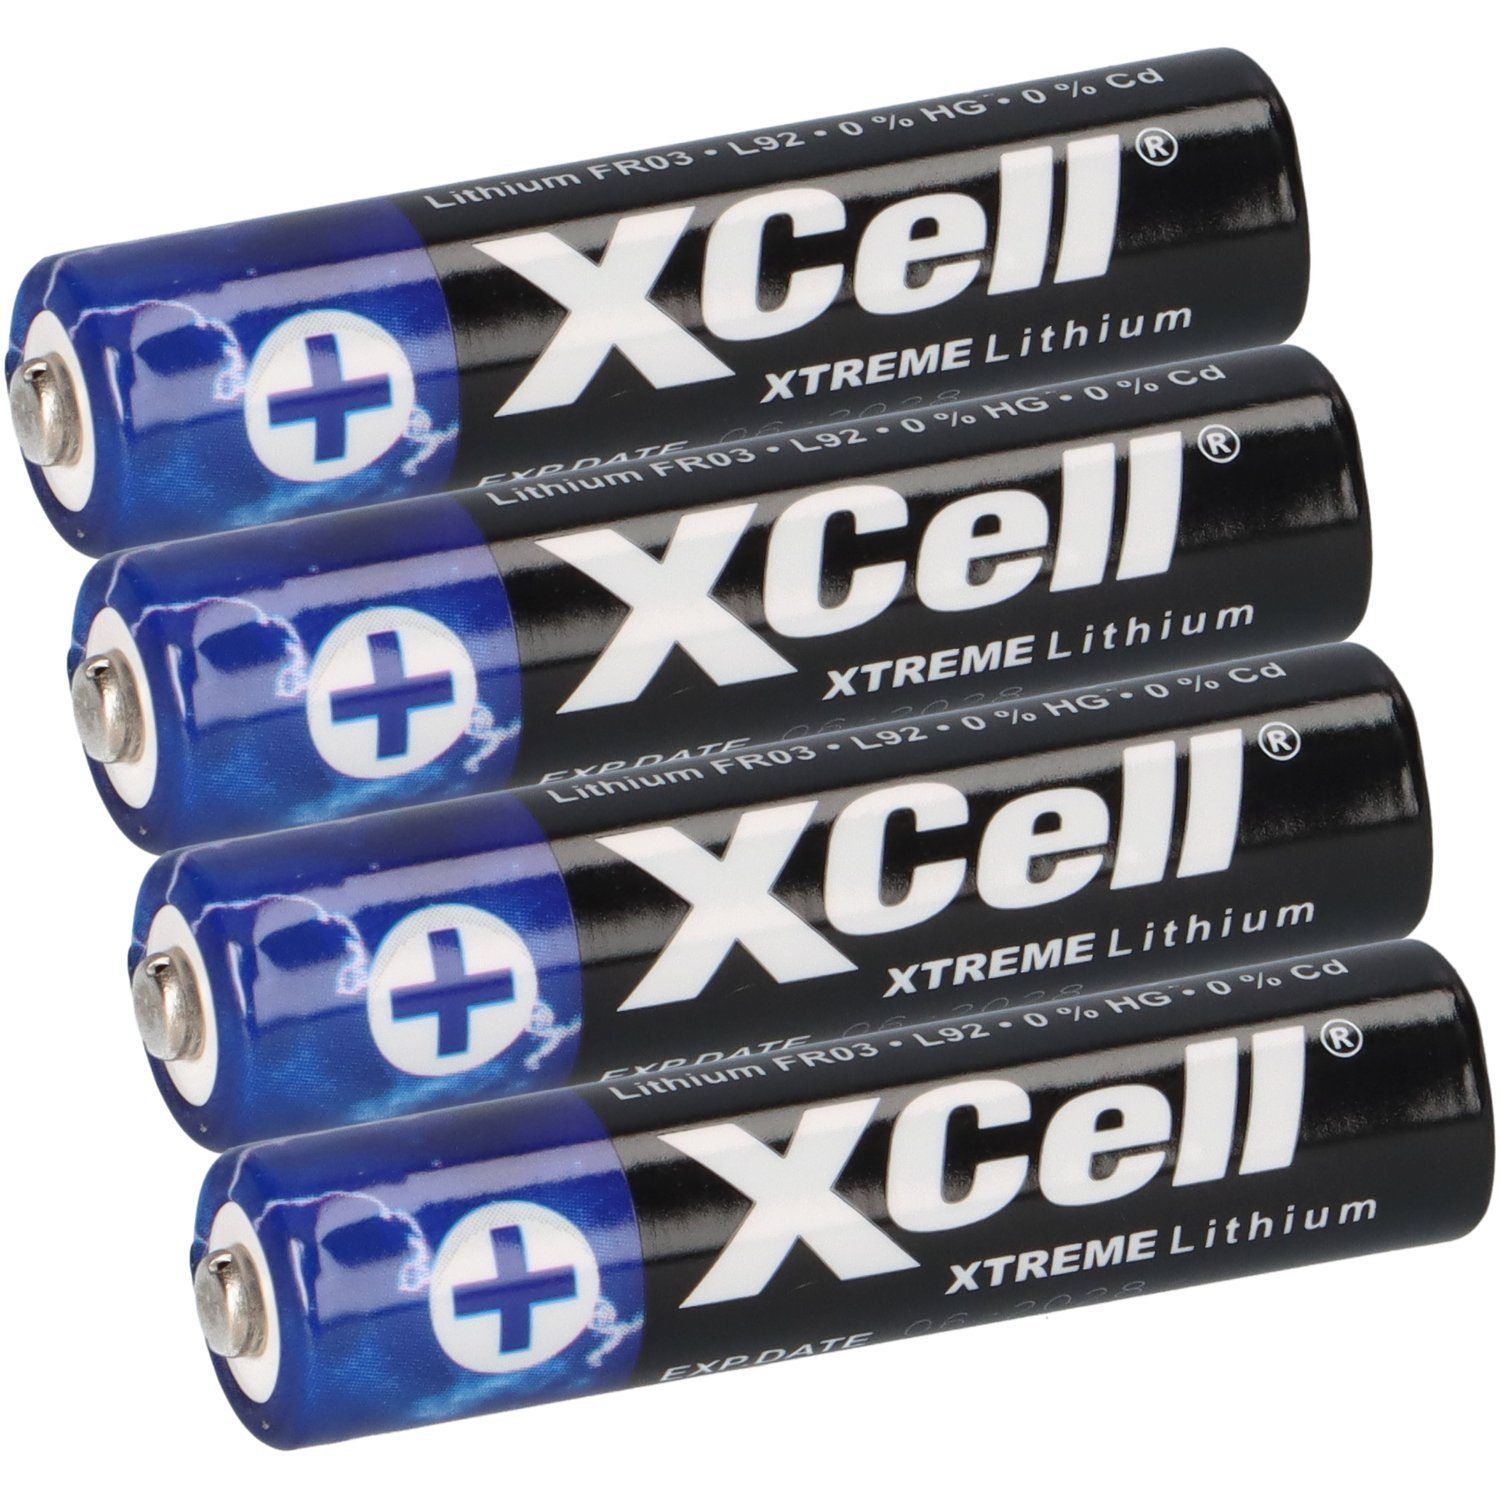 XCell XTREME Lithium Batterie AAA Micro FR03 L92 XCell 4er Blister Batterie